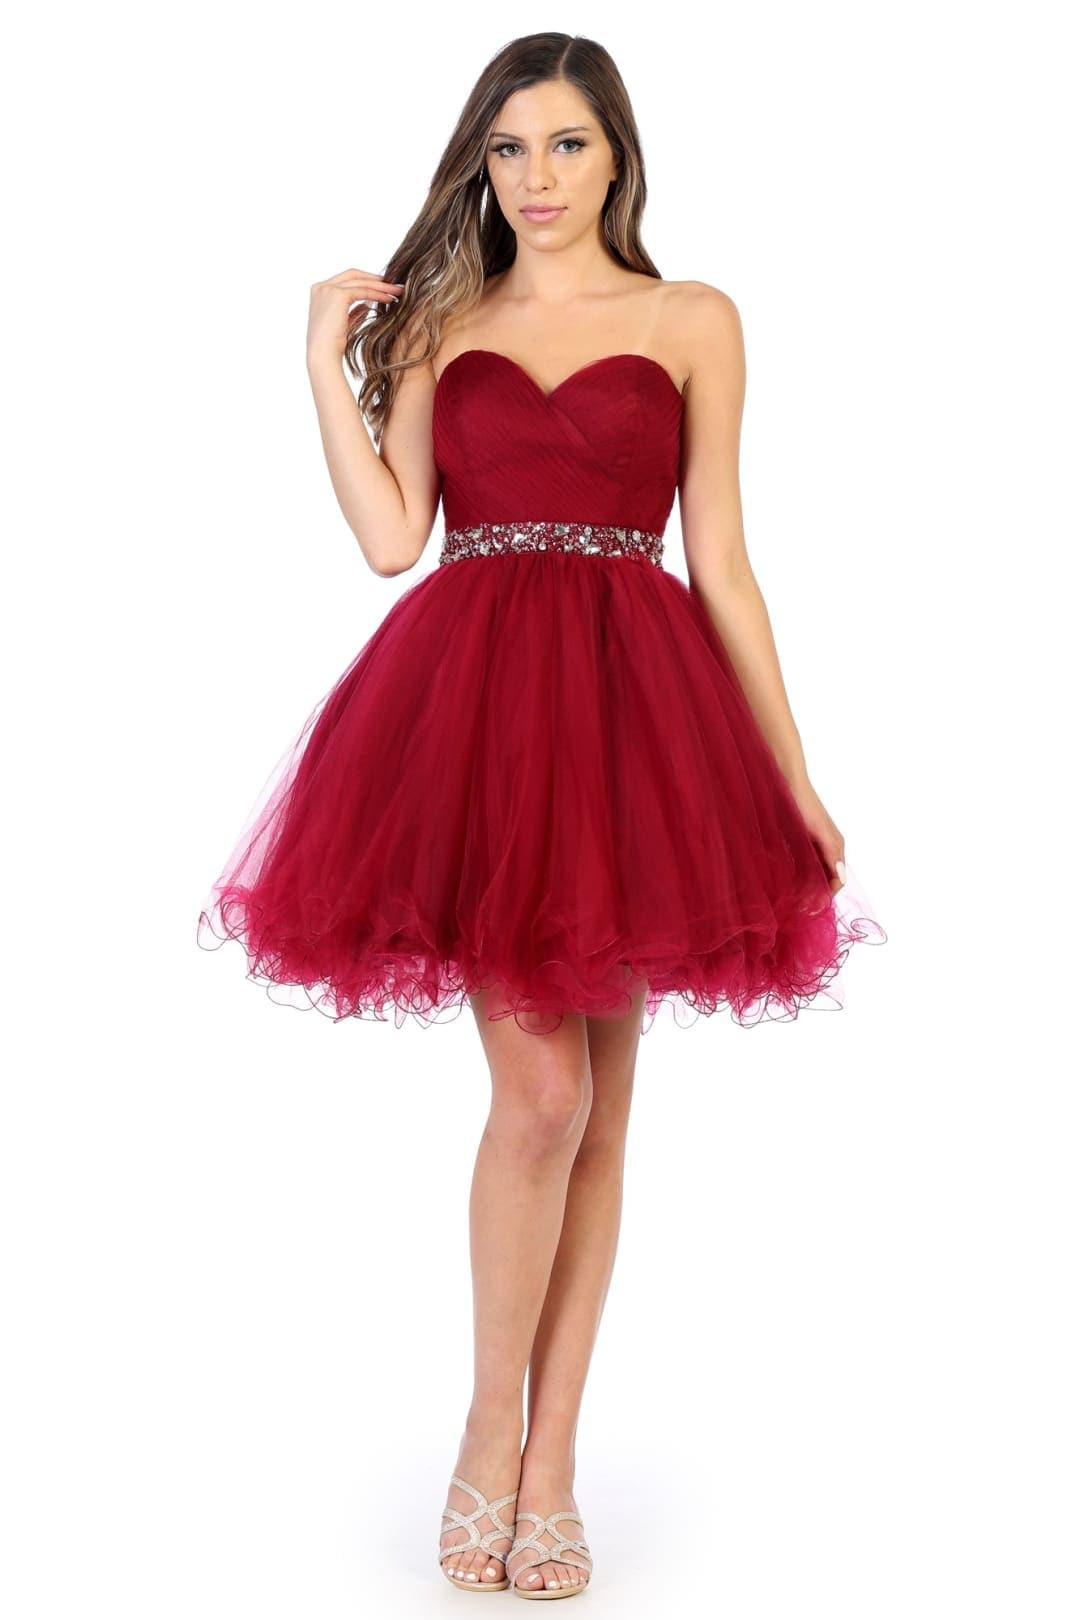 Sweetheart Bodice Cocktail Dress